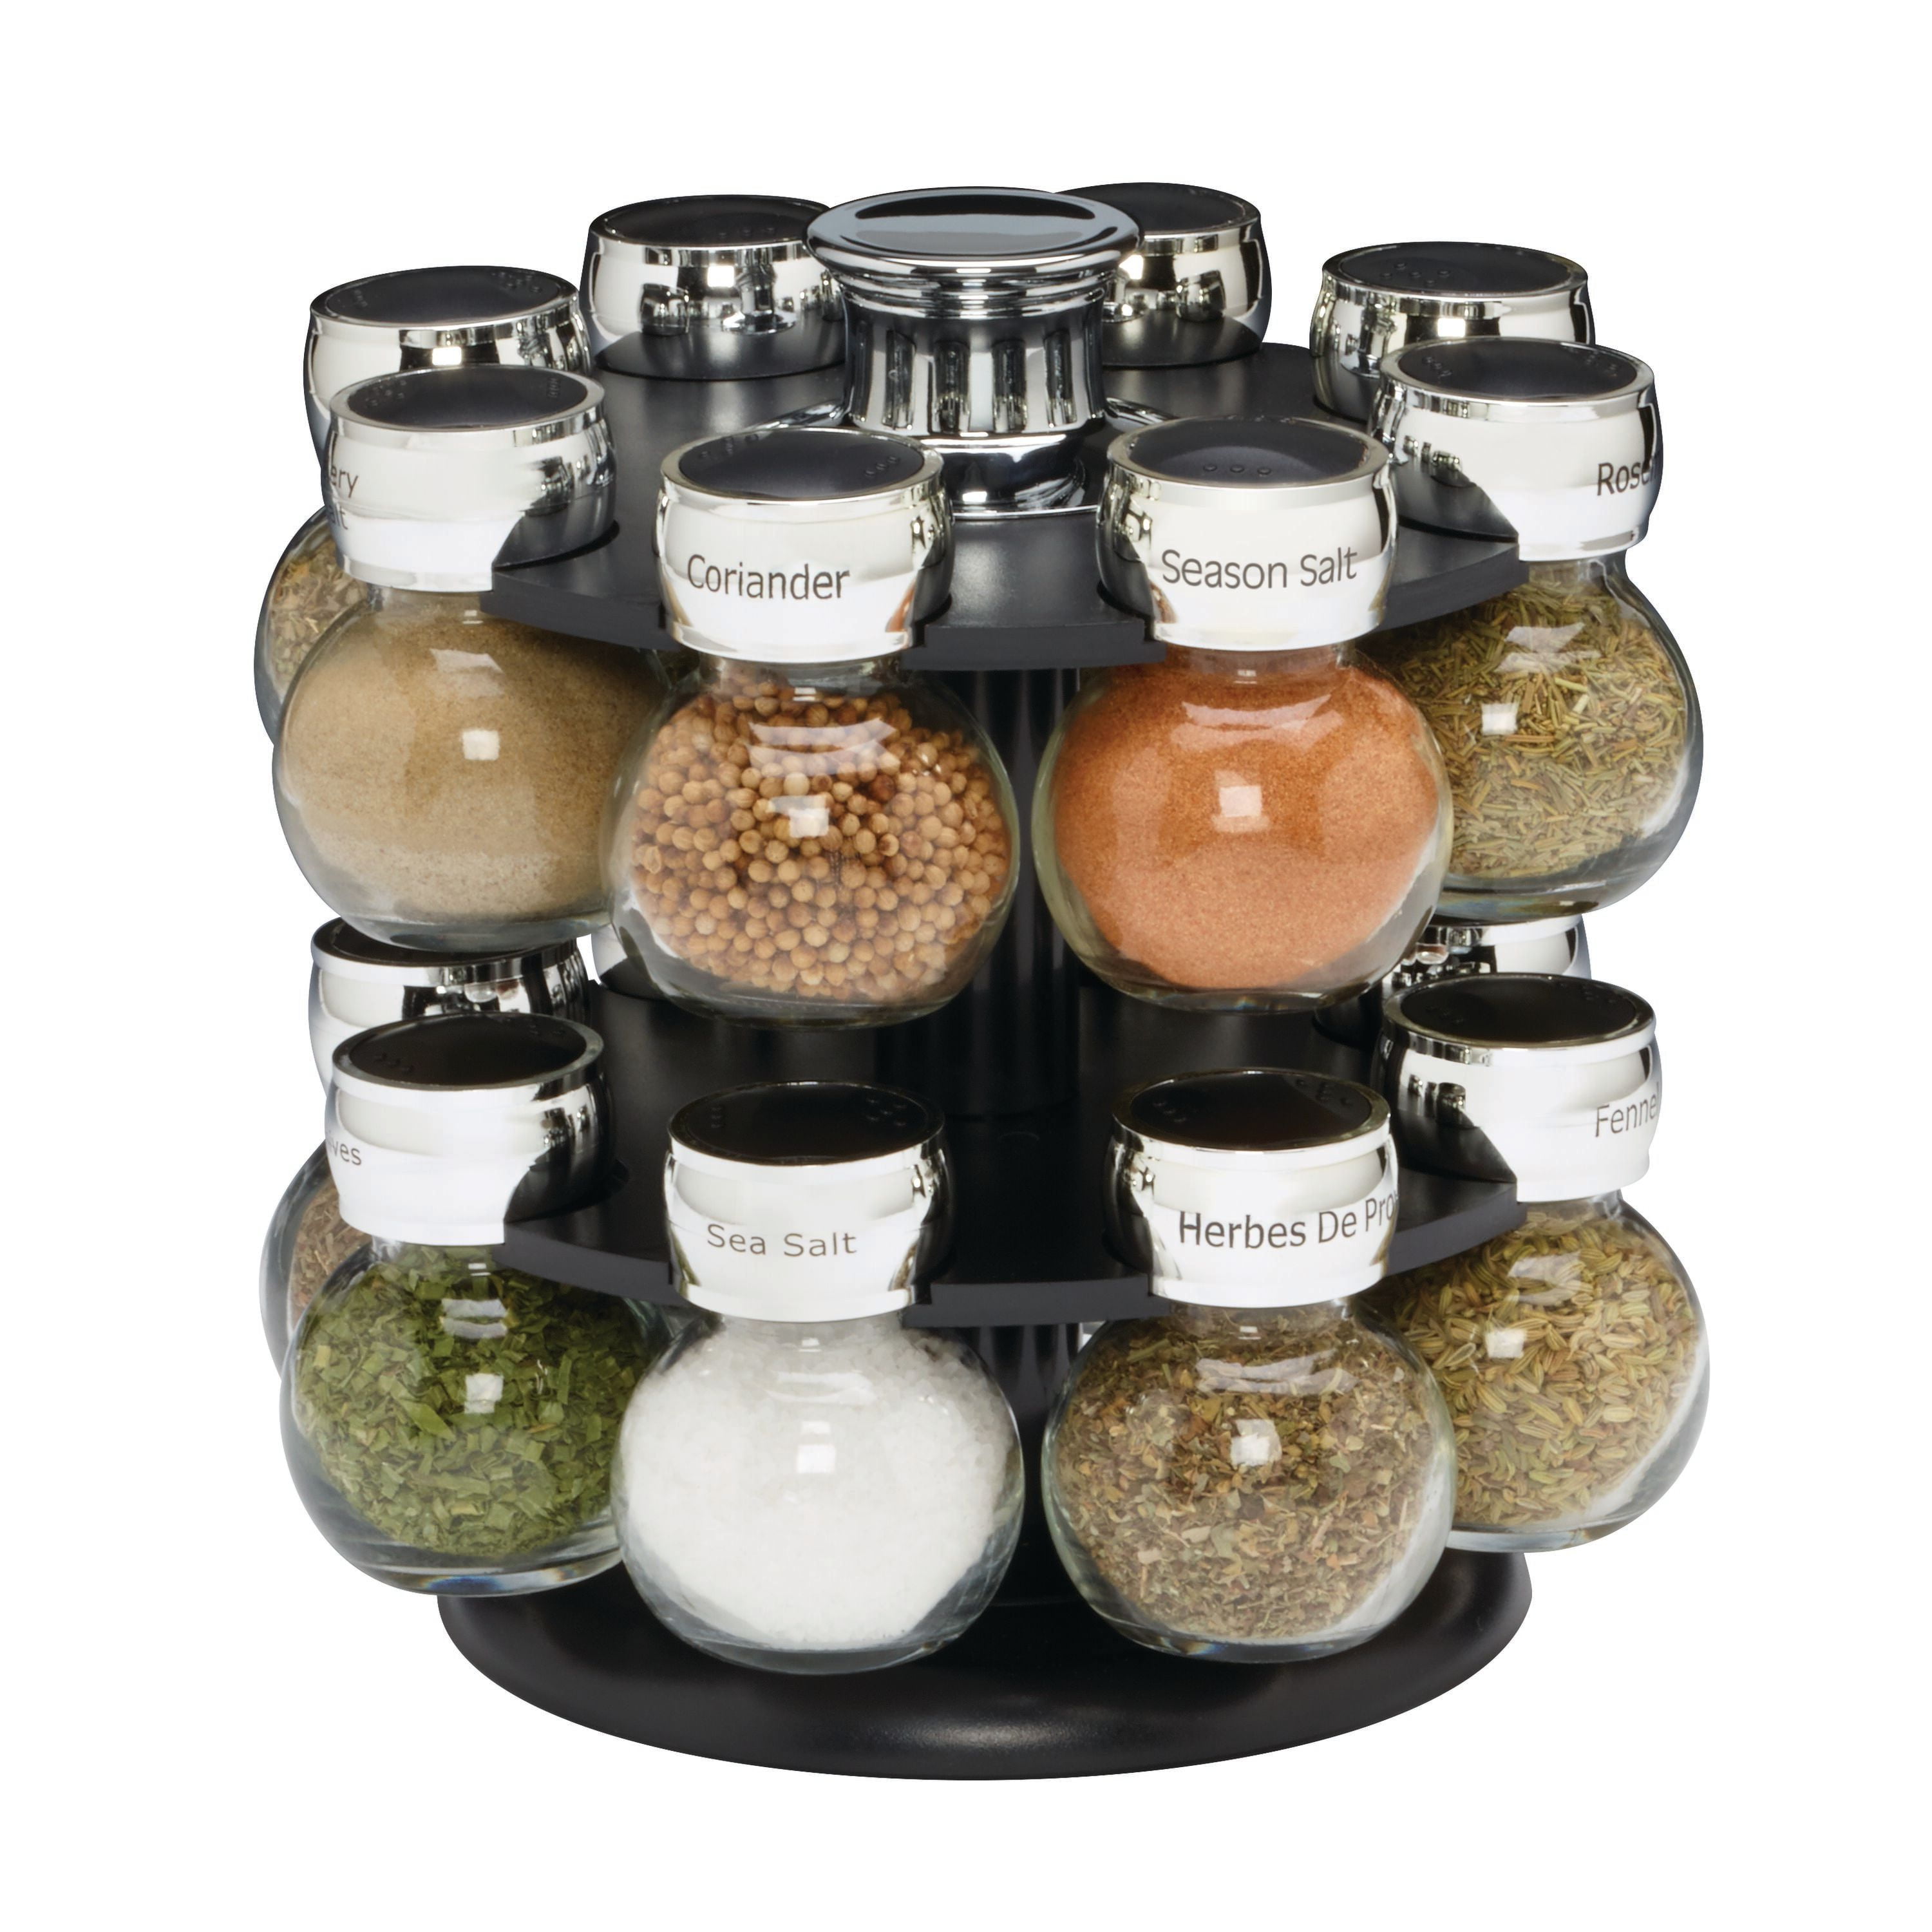 Details about   Kamenstein 20-Jar Revolving Spice Tower with Free Spice Refills for 5 Years 